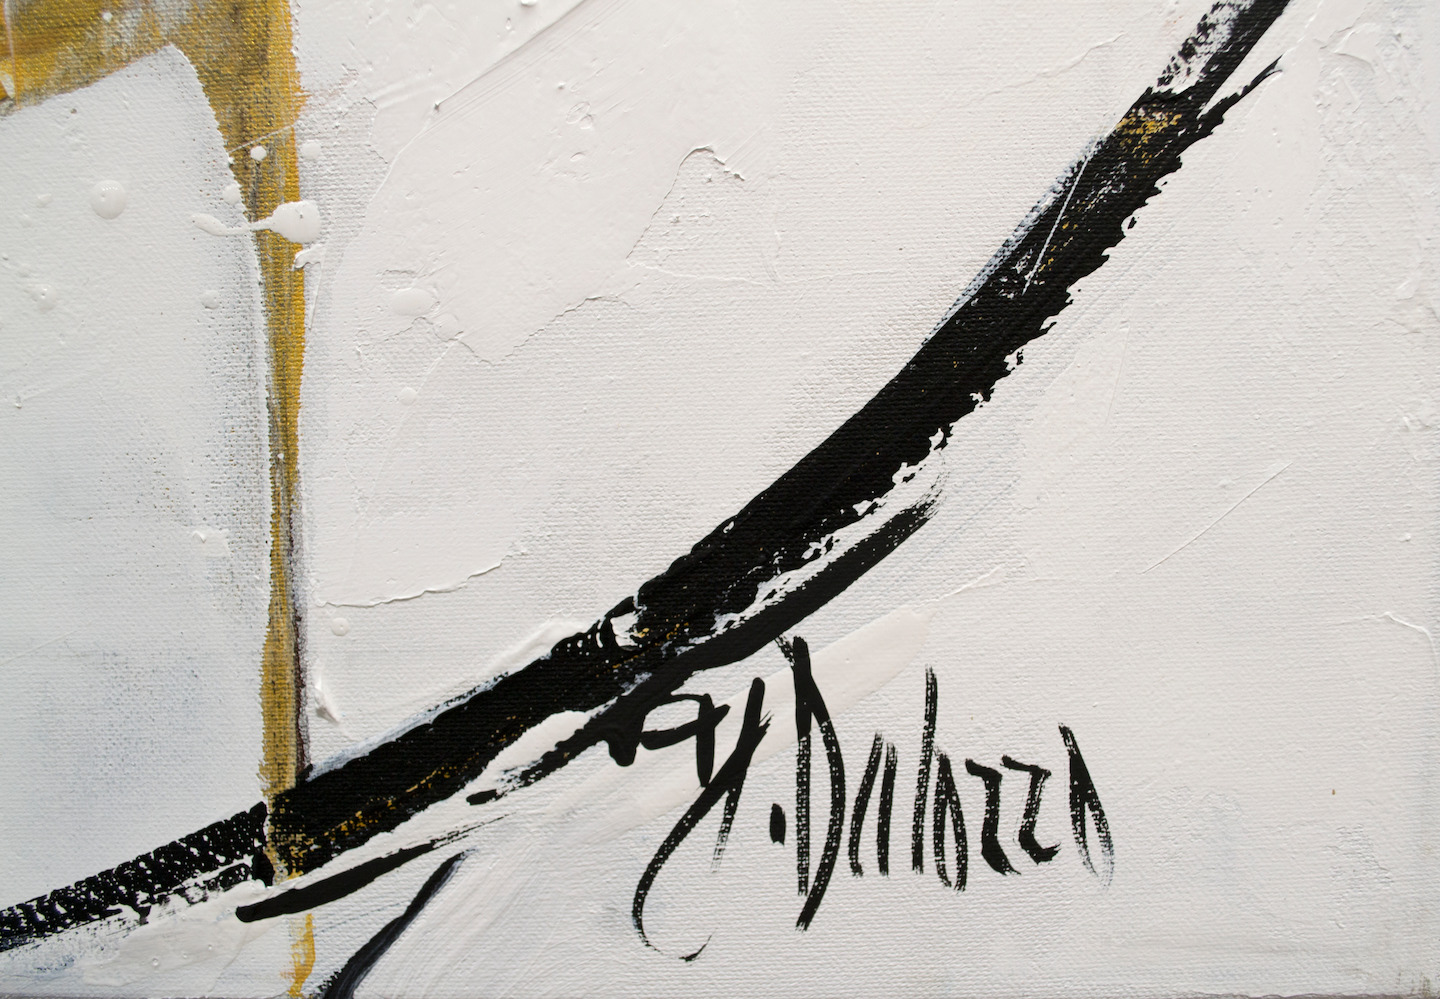 Close Up Signature Of Acrylic And Gold Leaf Painting "Intersection 2" By Judith Dalozzo